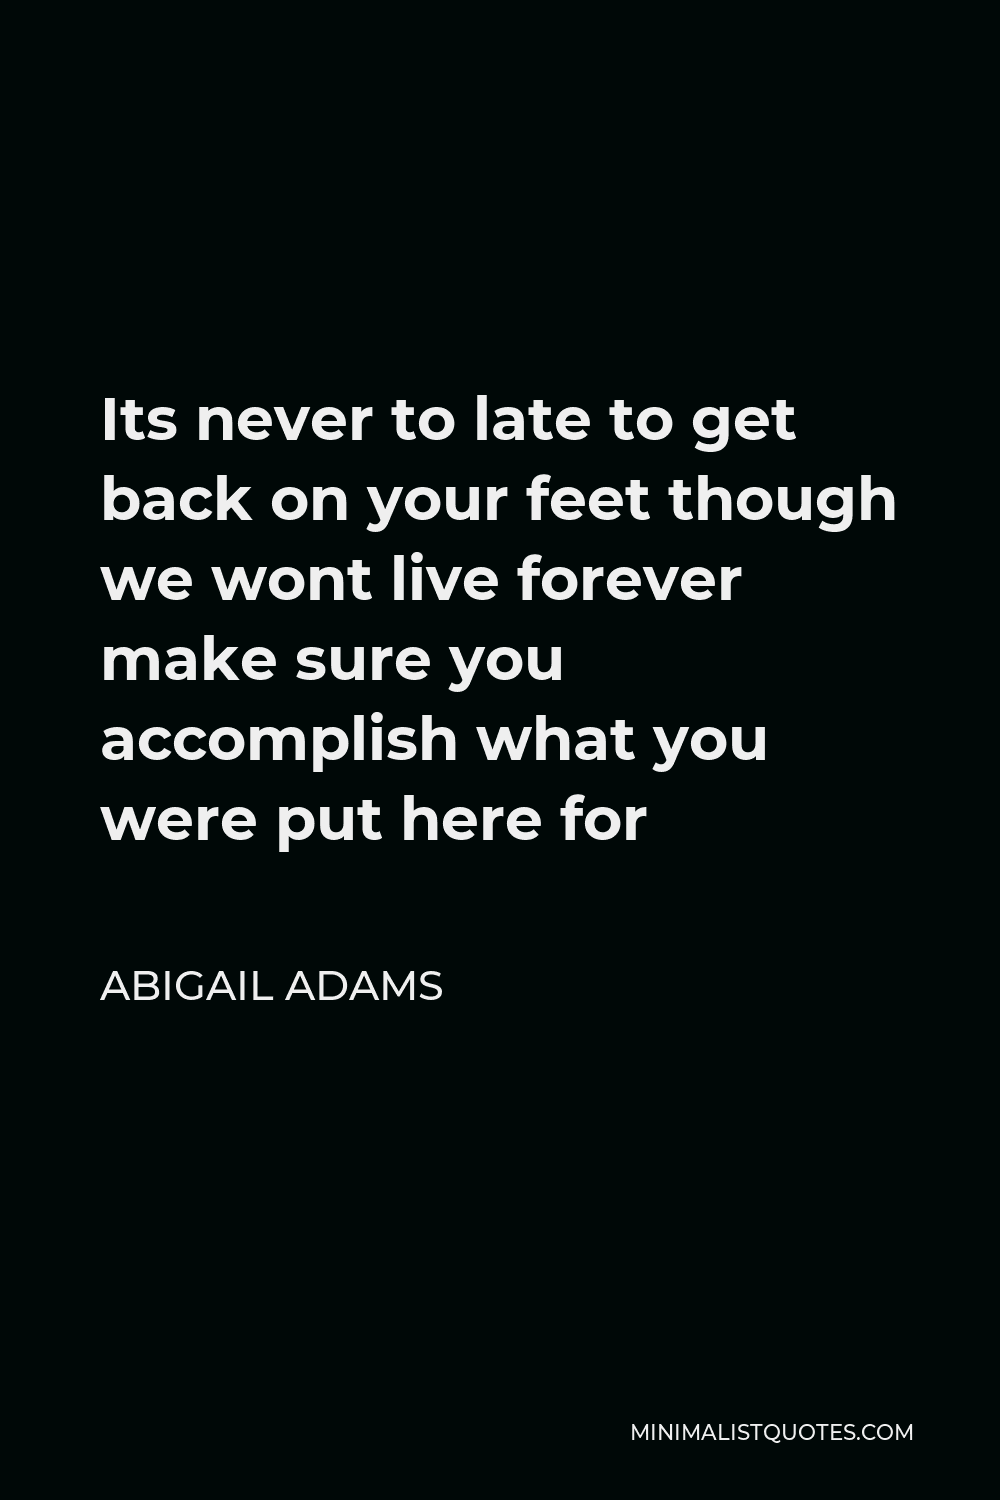 Abigail Adams Quote - Its never to late to get back on your feet though we wont live forever make sure you accomplish what you were put here for